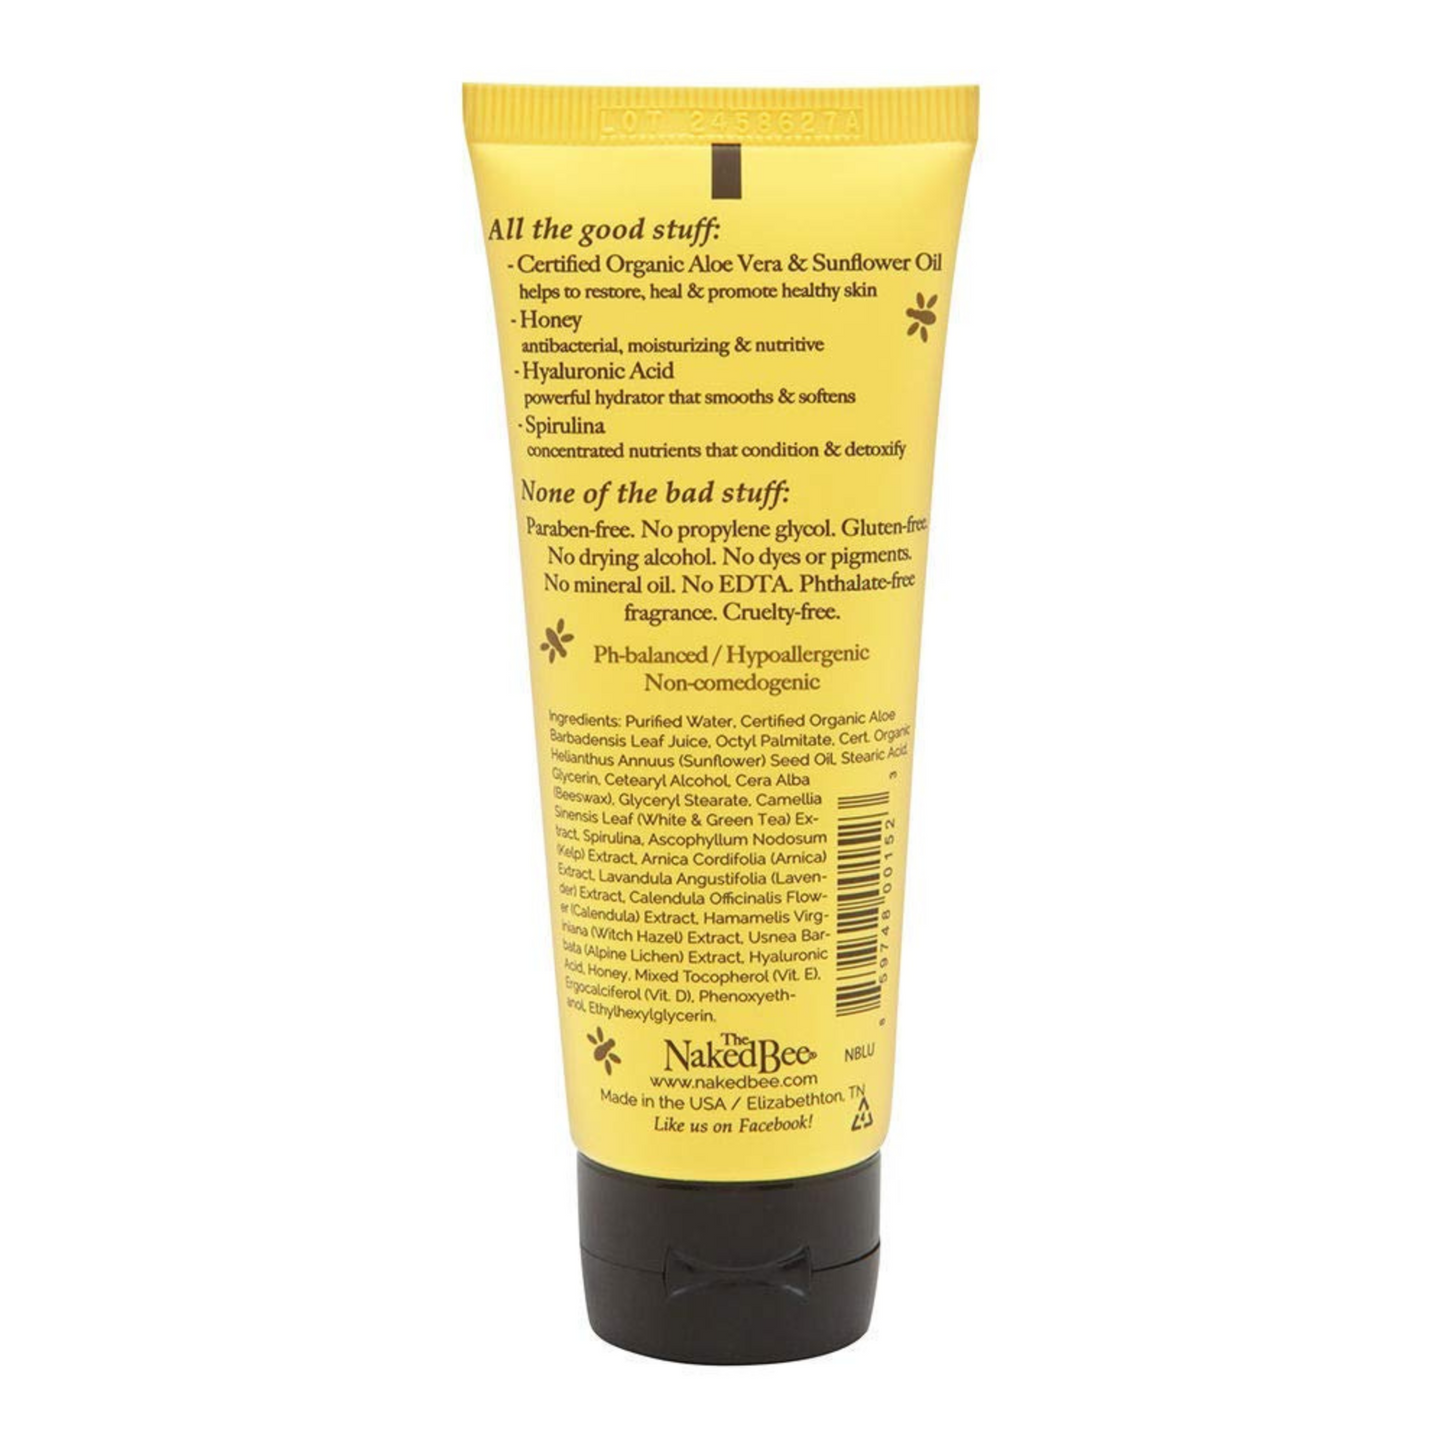 The Naked Bee Unscented Moisturizing Hand and Body Lotion (2.25 fl oz) #10086134